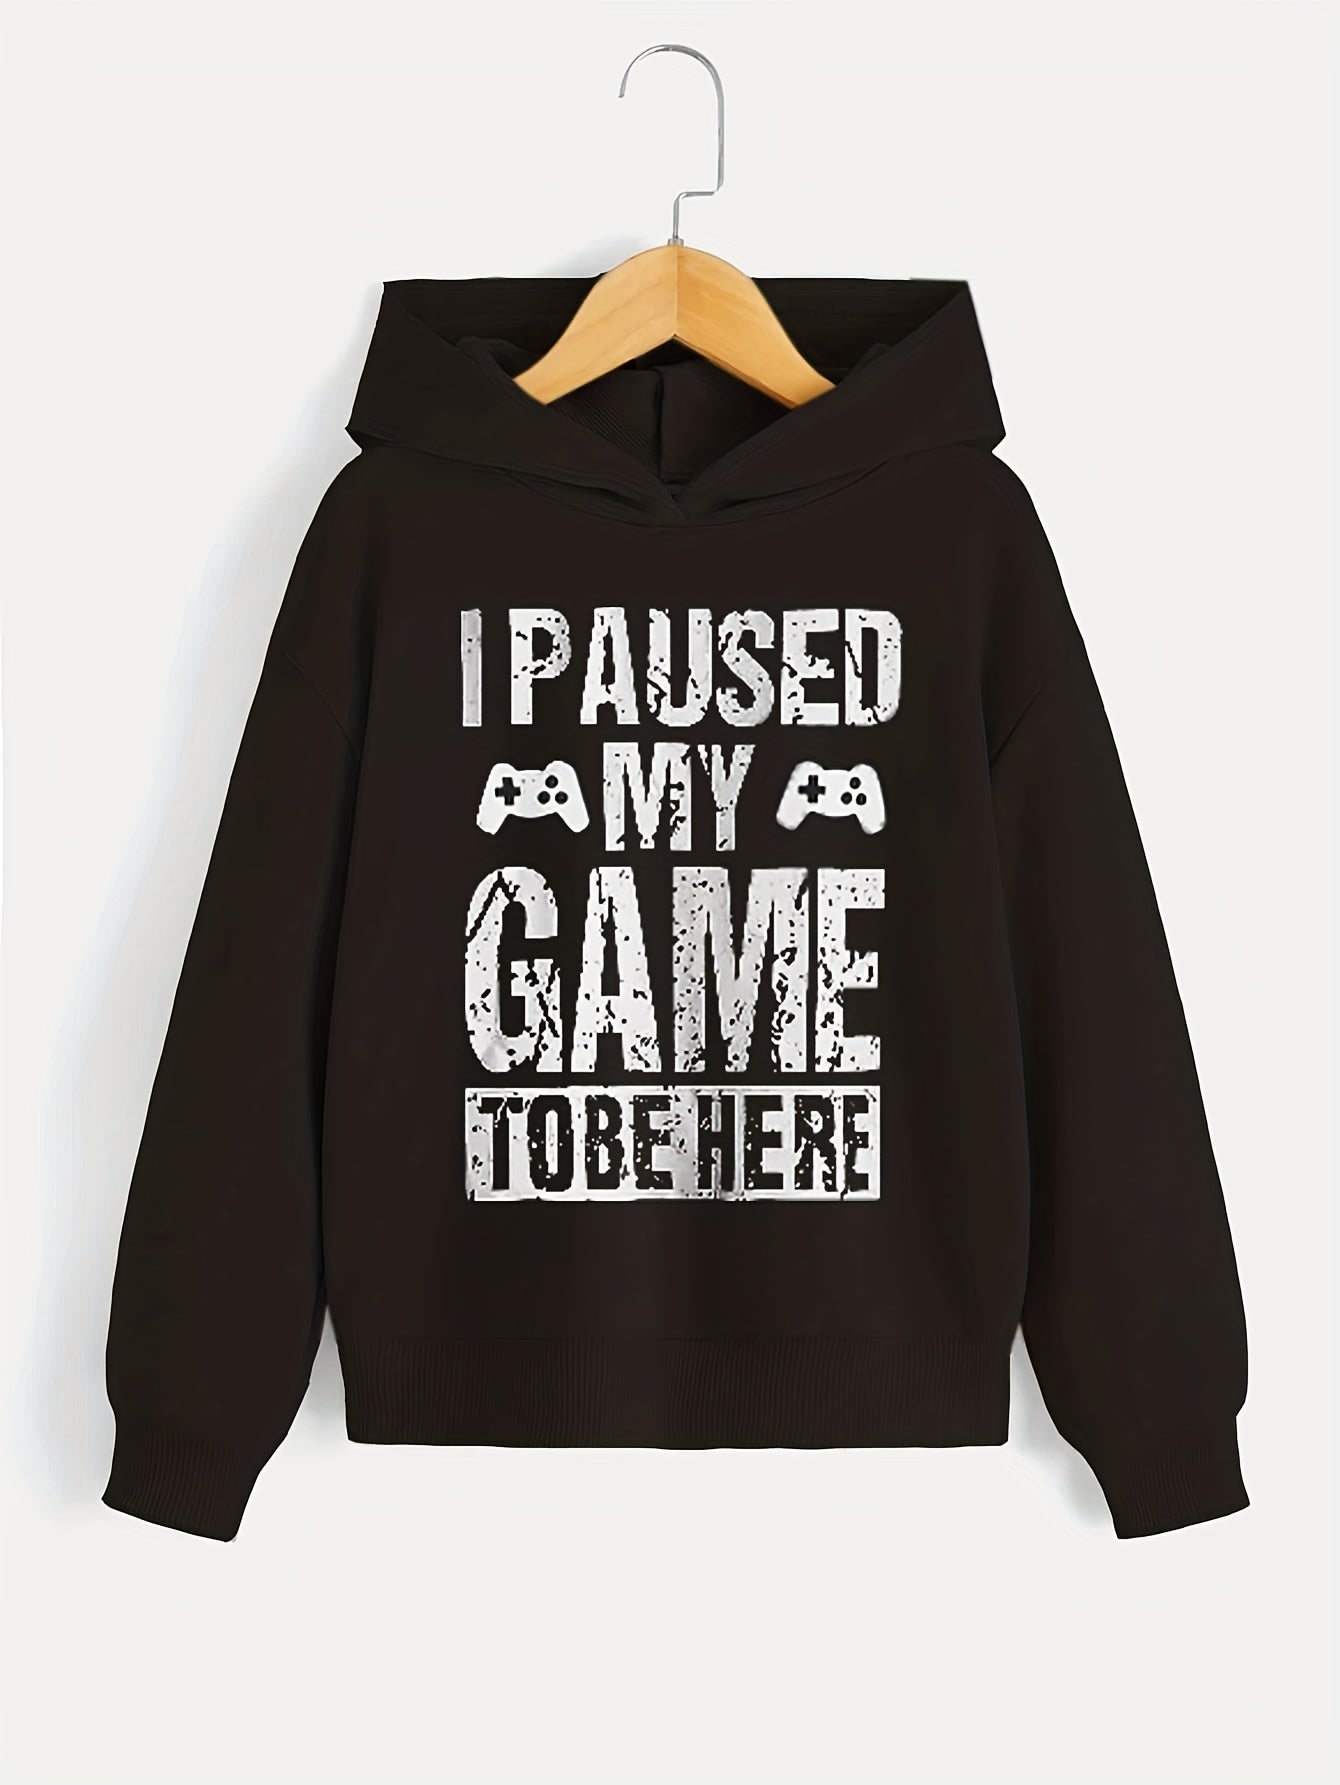 I PAUSED MY GAME TO BE HERE Letter Print Cute&Cozy Hoodie For Kids Boys - Keep Him Warm And Stylish!